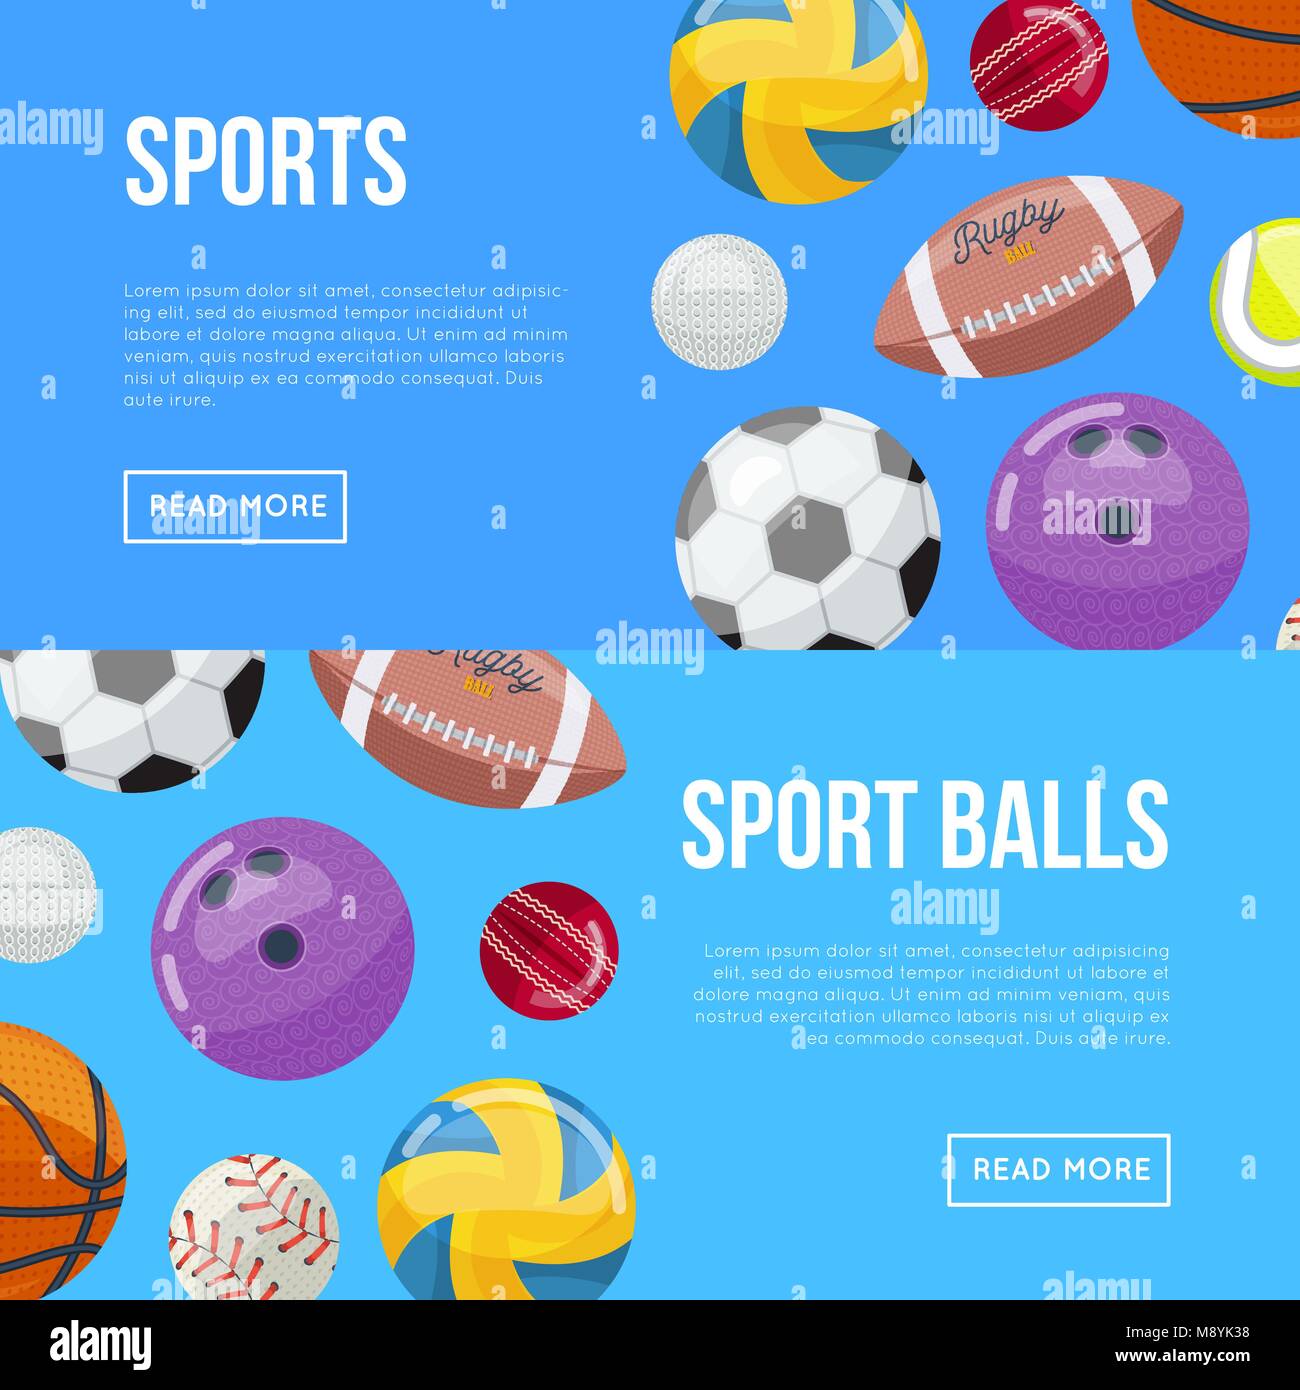 Internet page about sports and balls Stock Vector